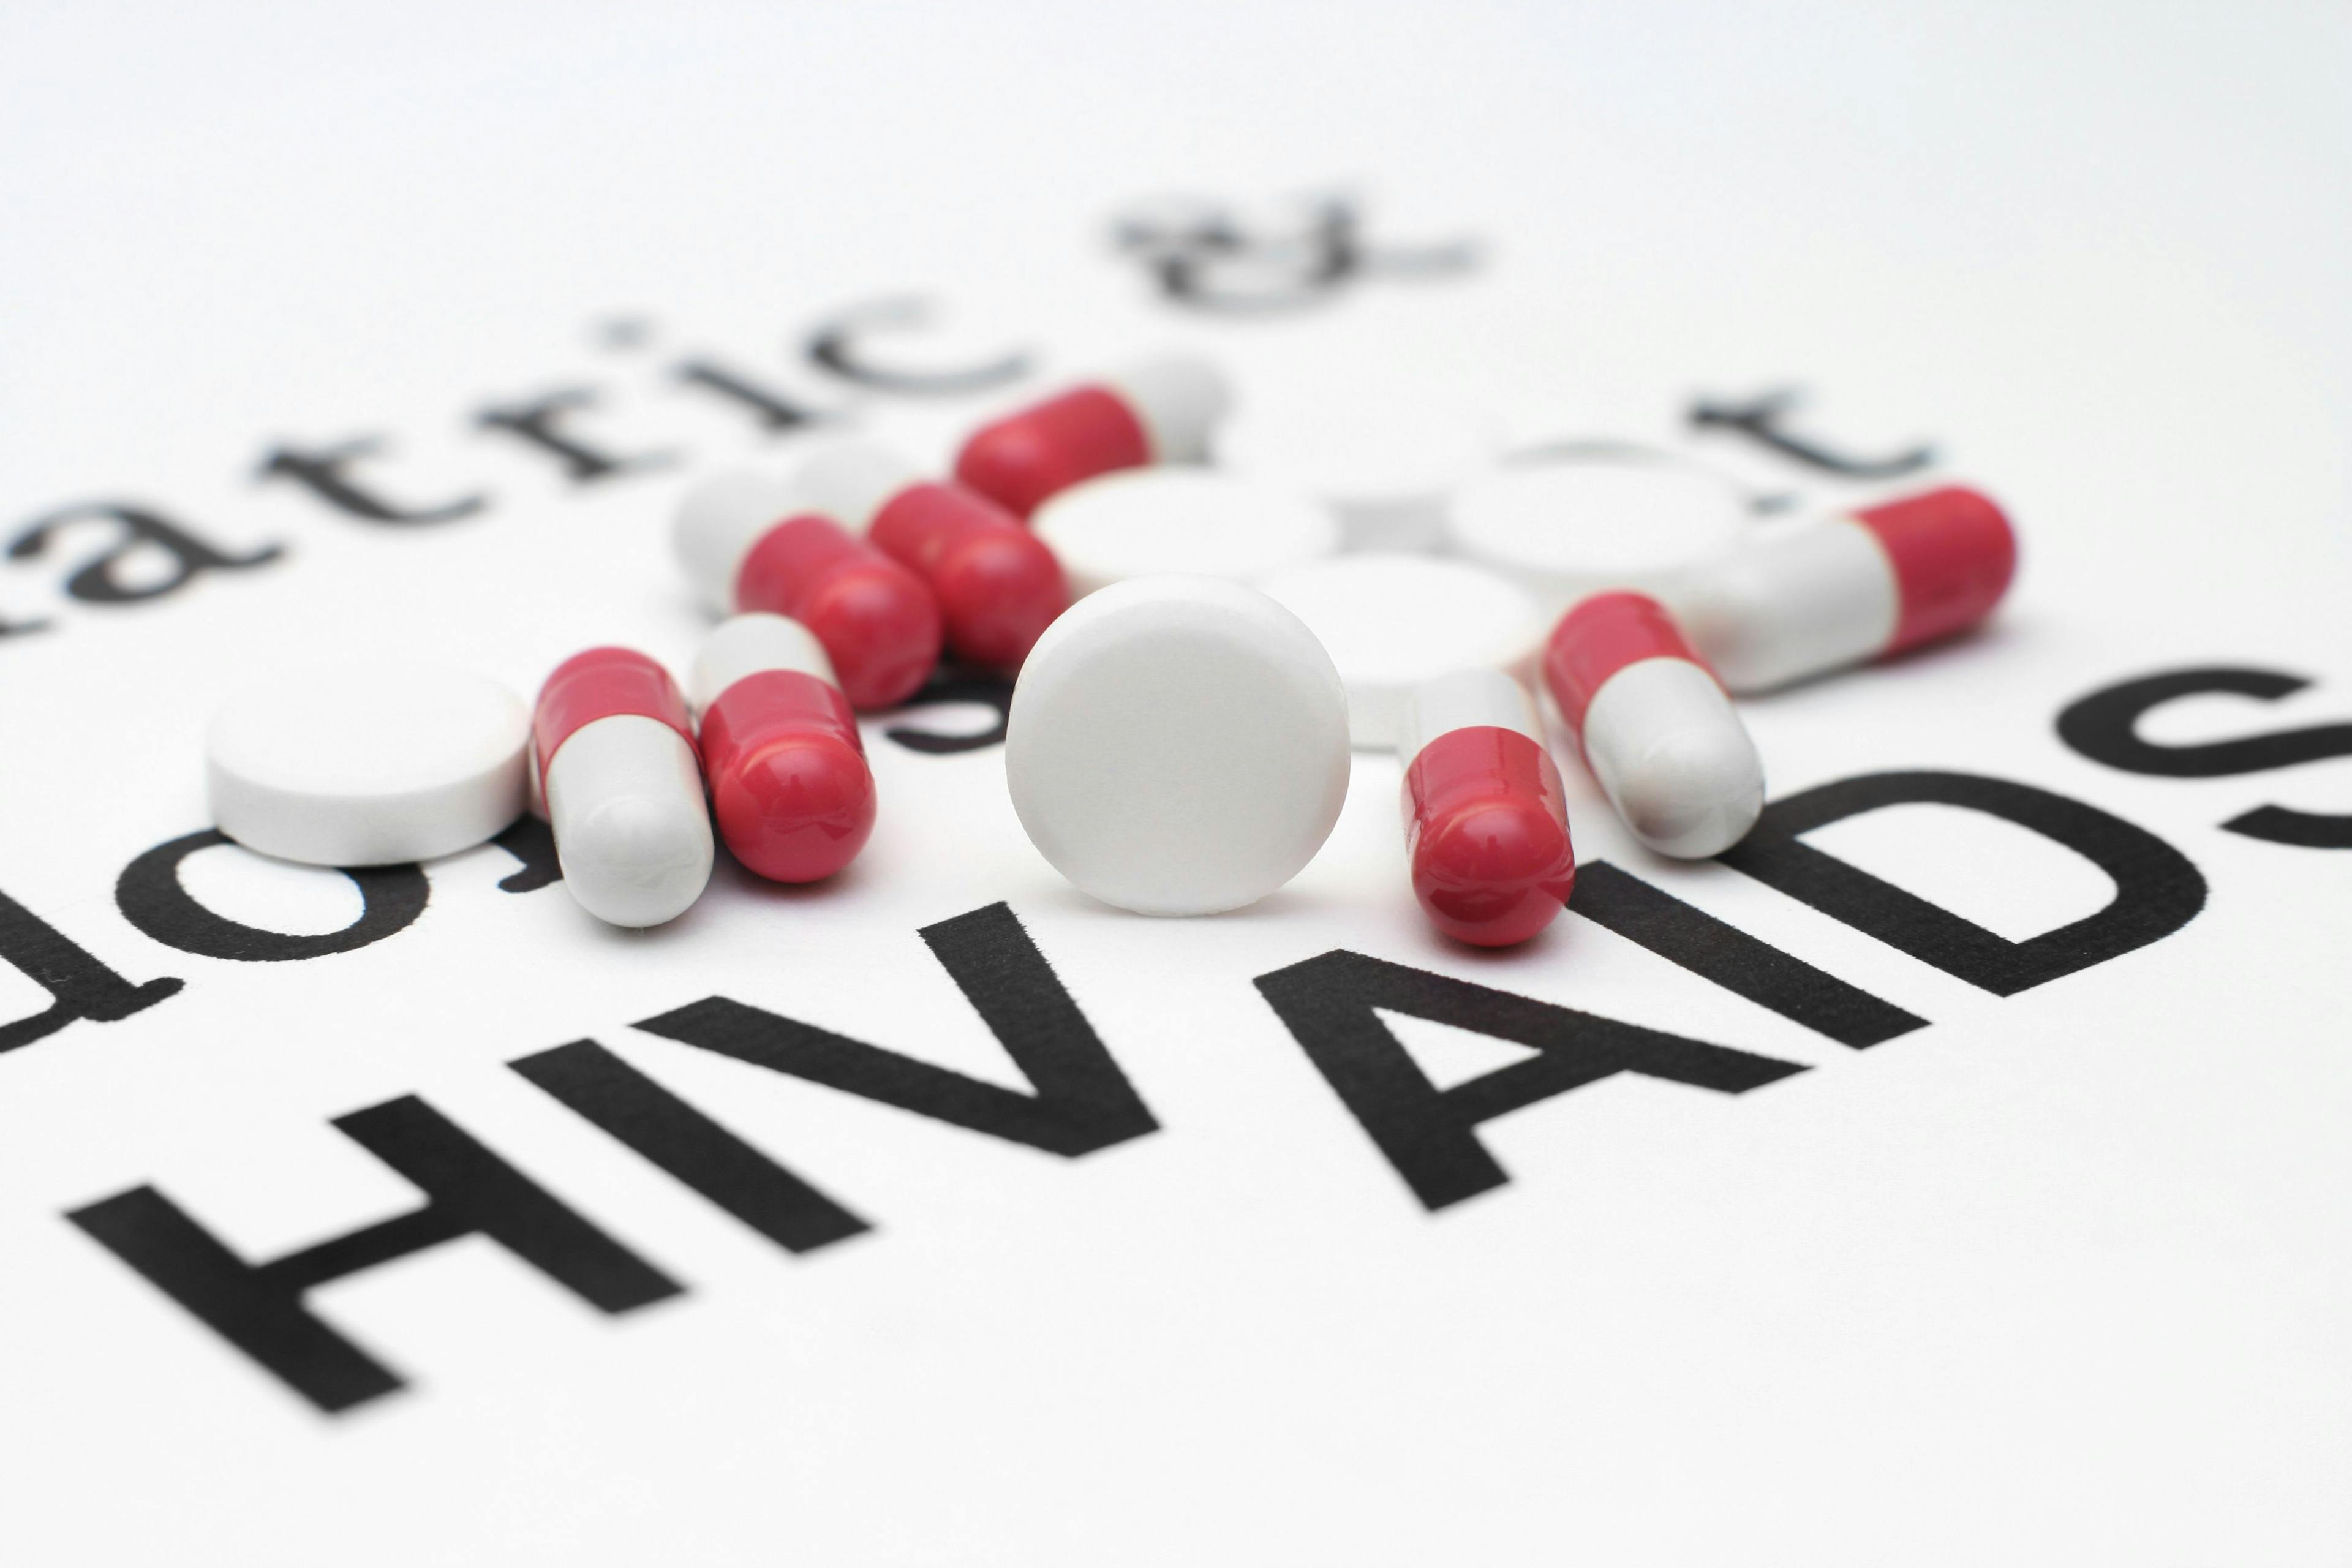 5 developments to watch for in HIV/AIDS treatment and prevention in 2021